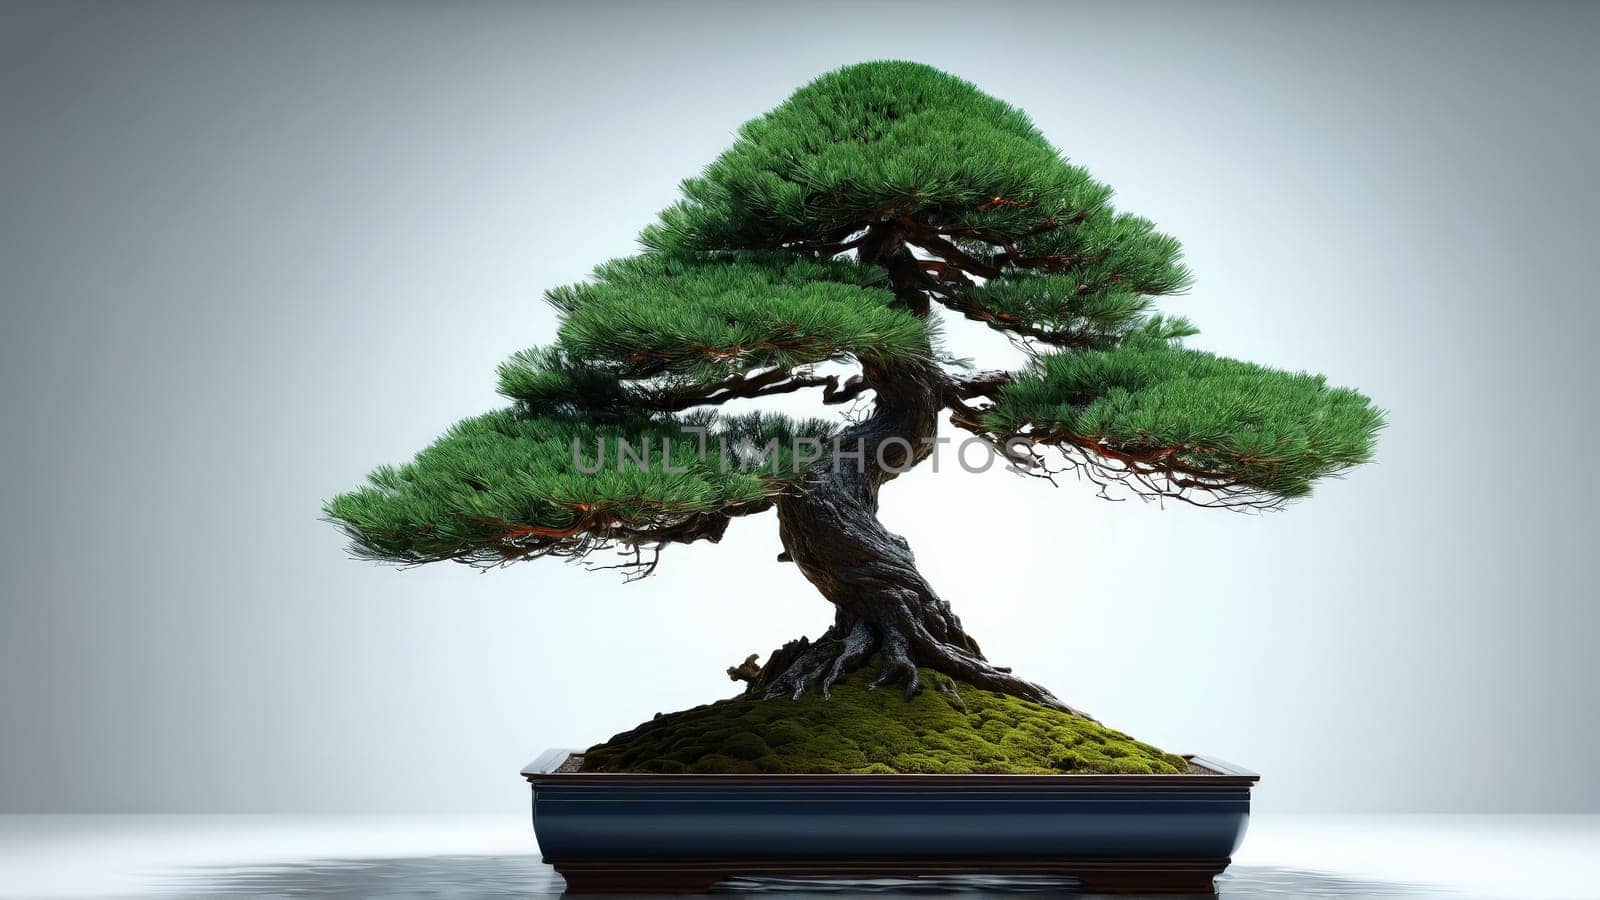 Majestic spruce bonsai with tiered branches and rich een needles sleek minimalist lines crisp shadows by panophotograph